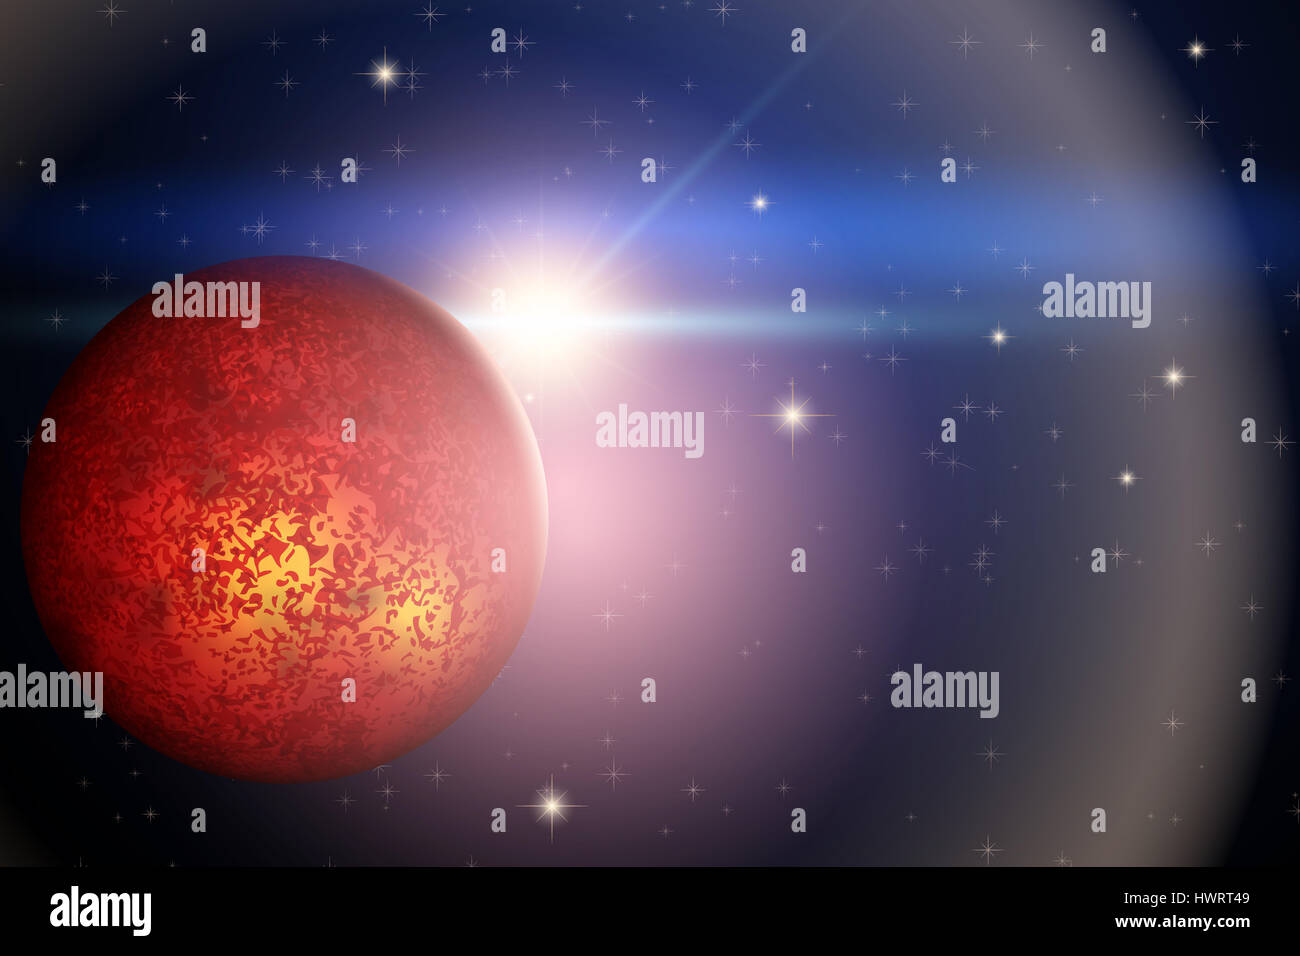 The Planet Mars and bright star in space. Abstract scientific background. Stock Photo